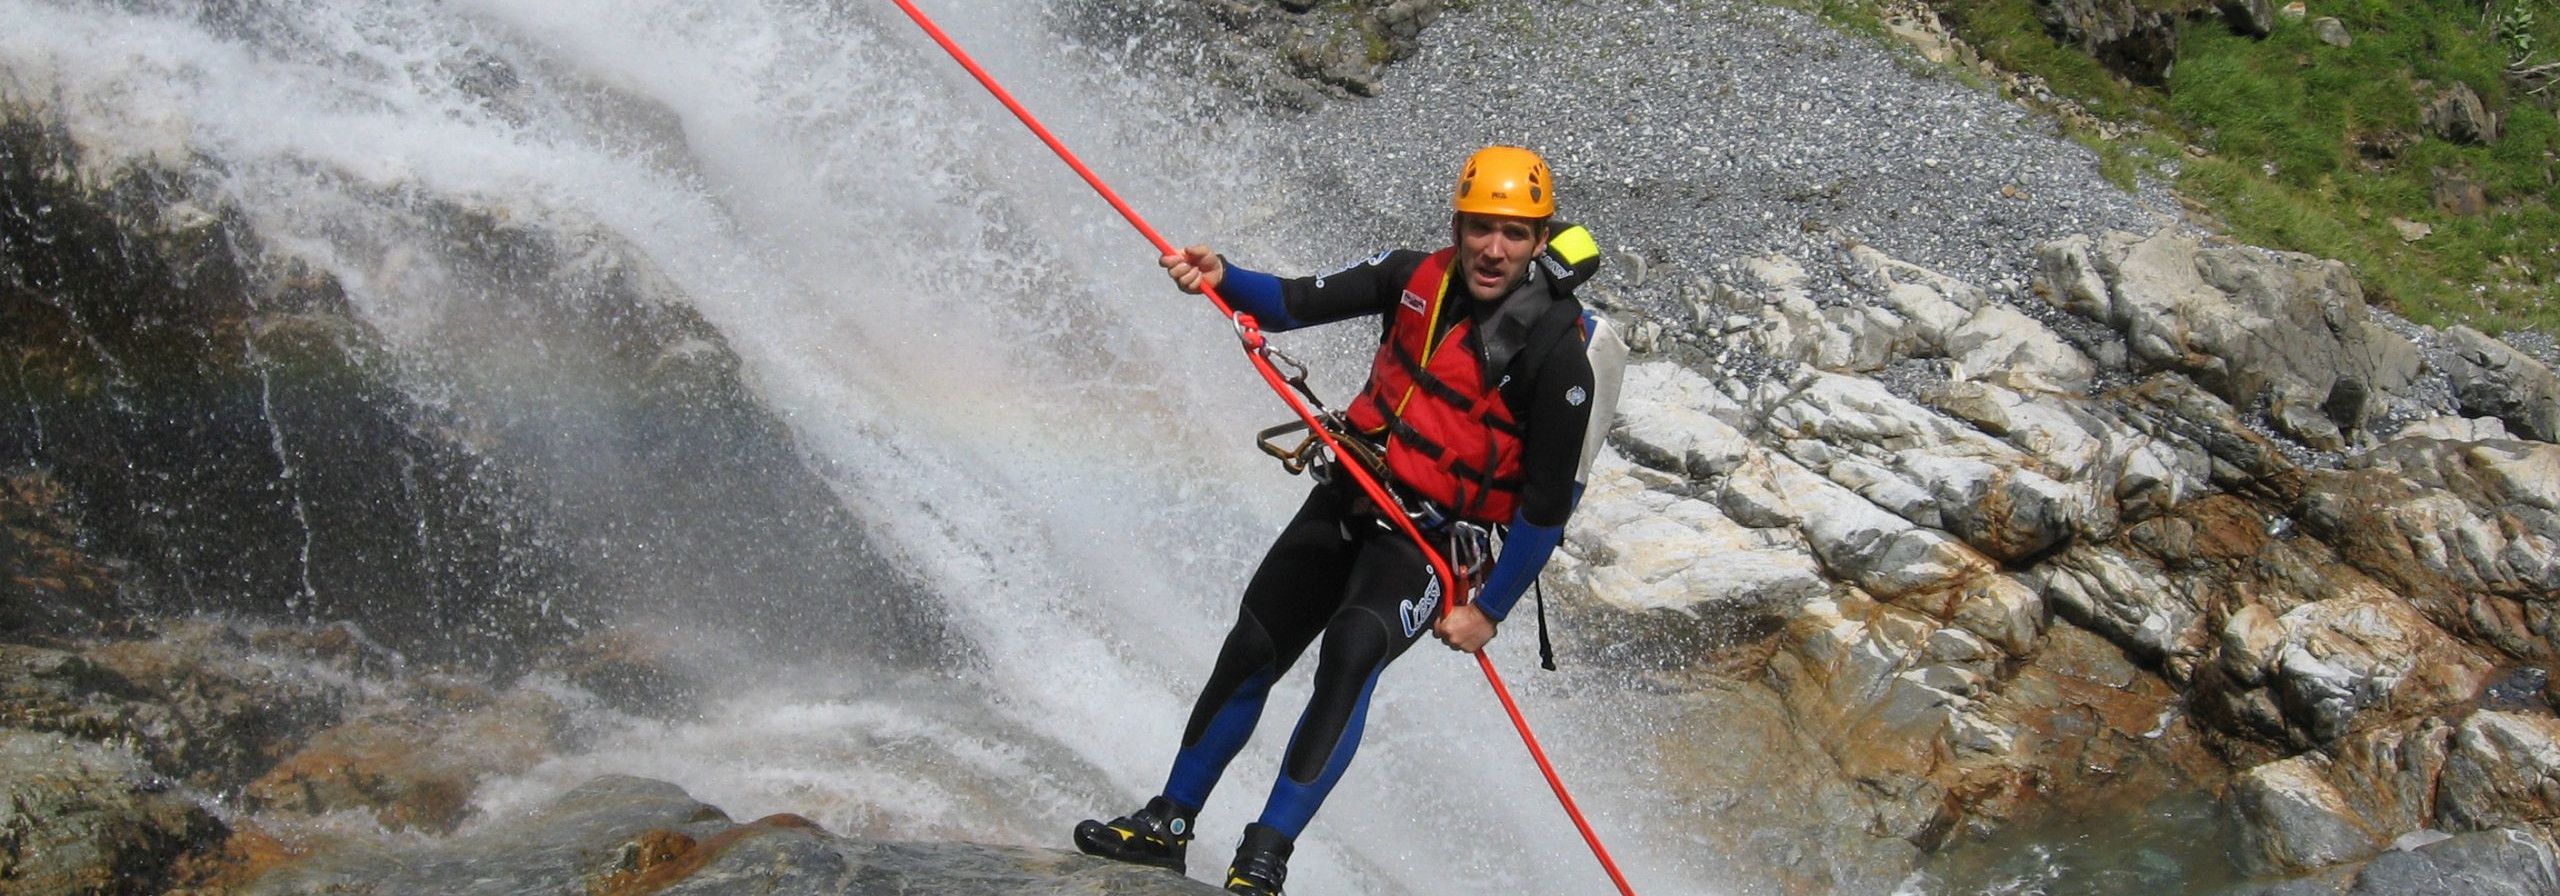 Formations canyoning - Discovery Canyon - SOA Canyoning Guide Refresh